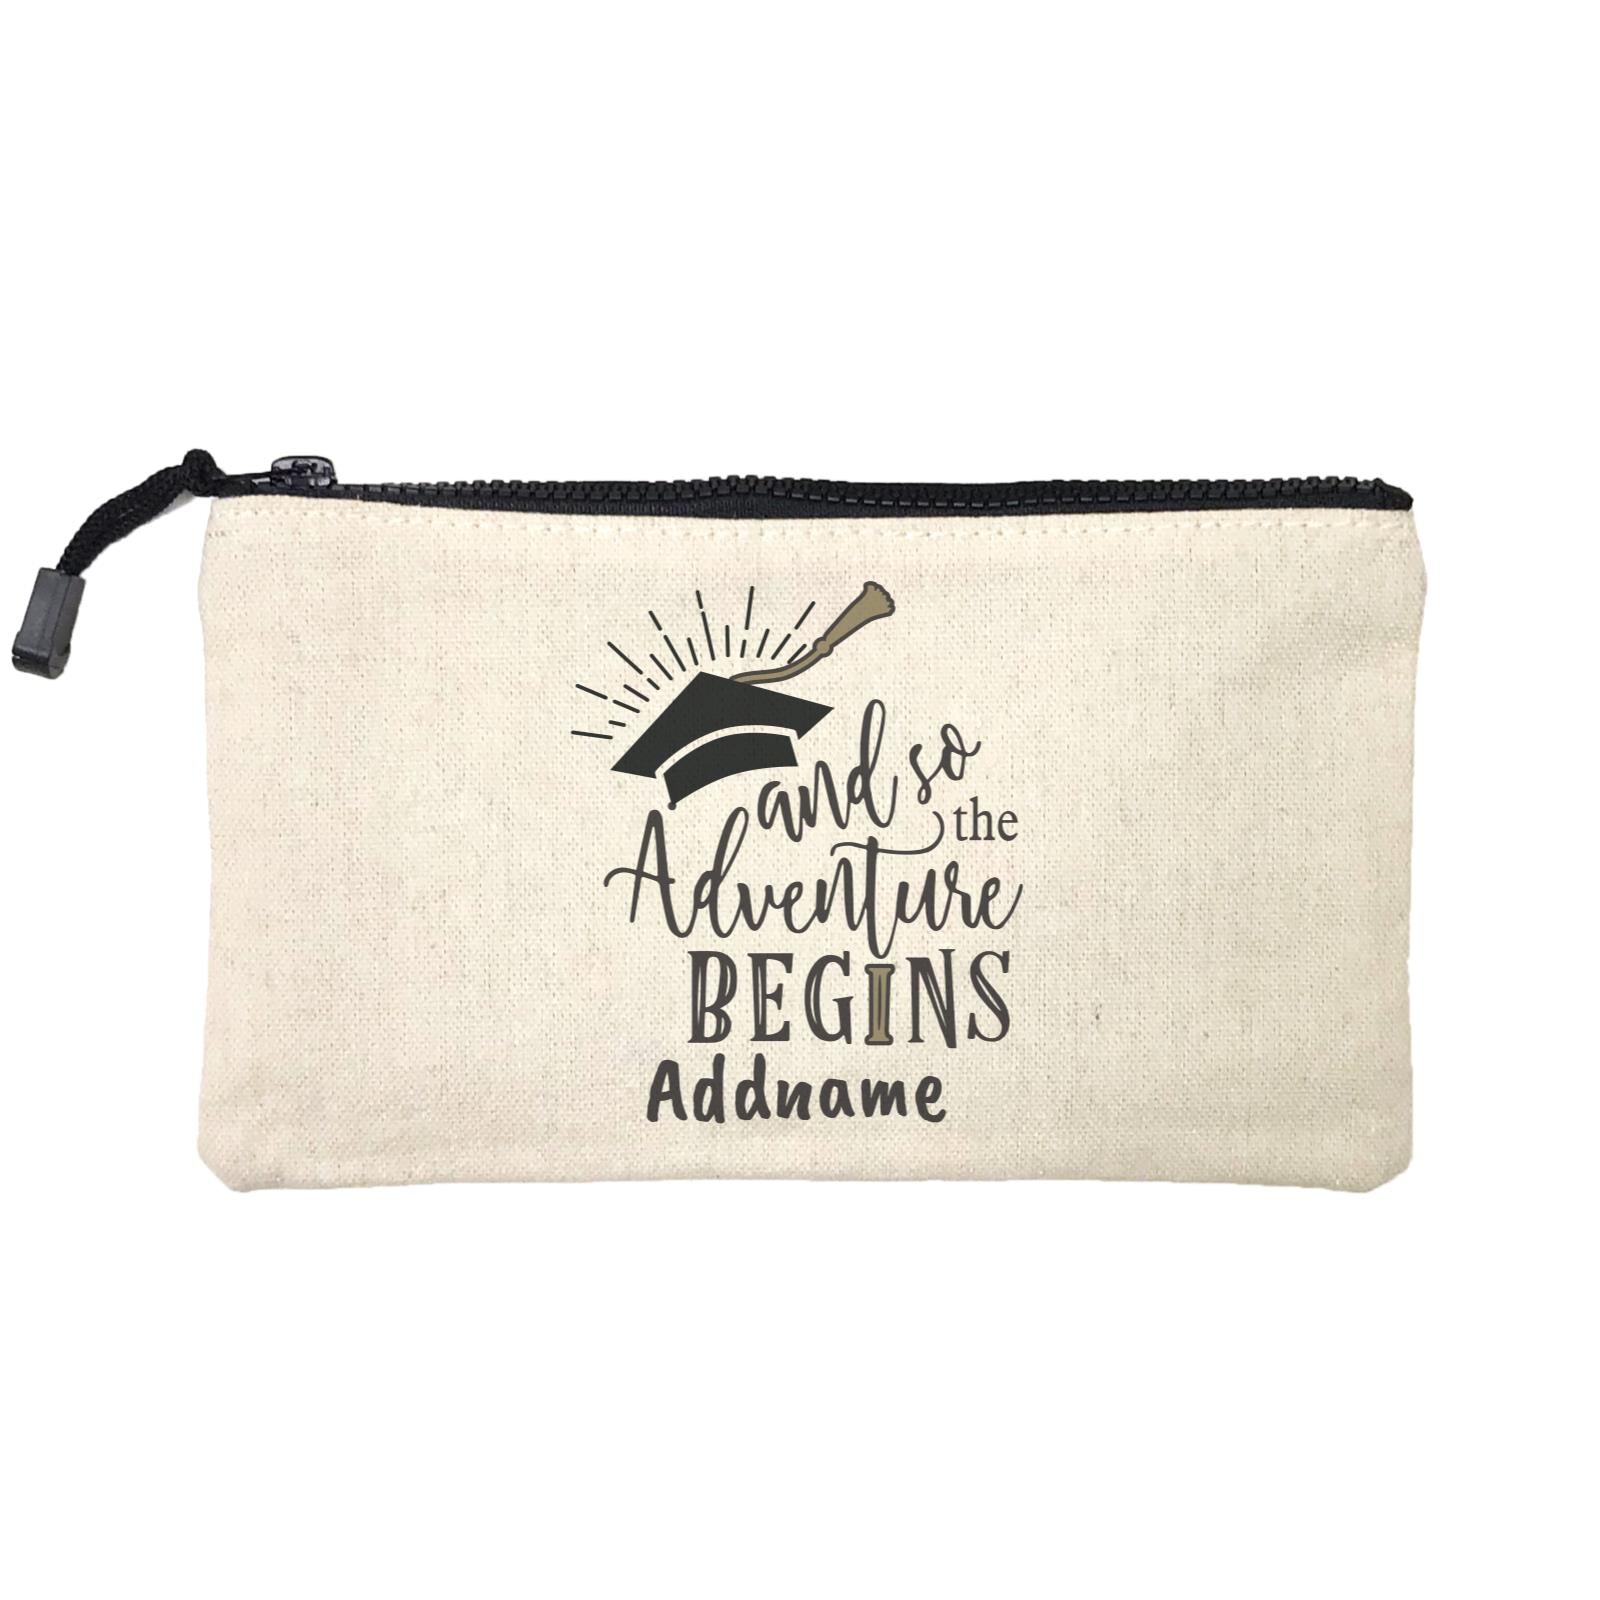 Graduation Series And So The Adventure Begins Mini Accessories Stationery Pouch